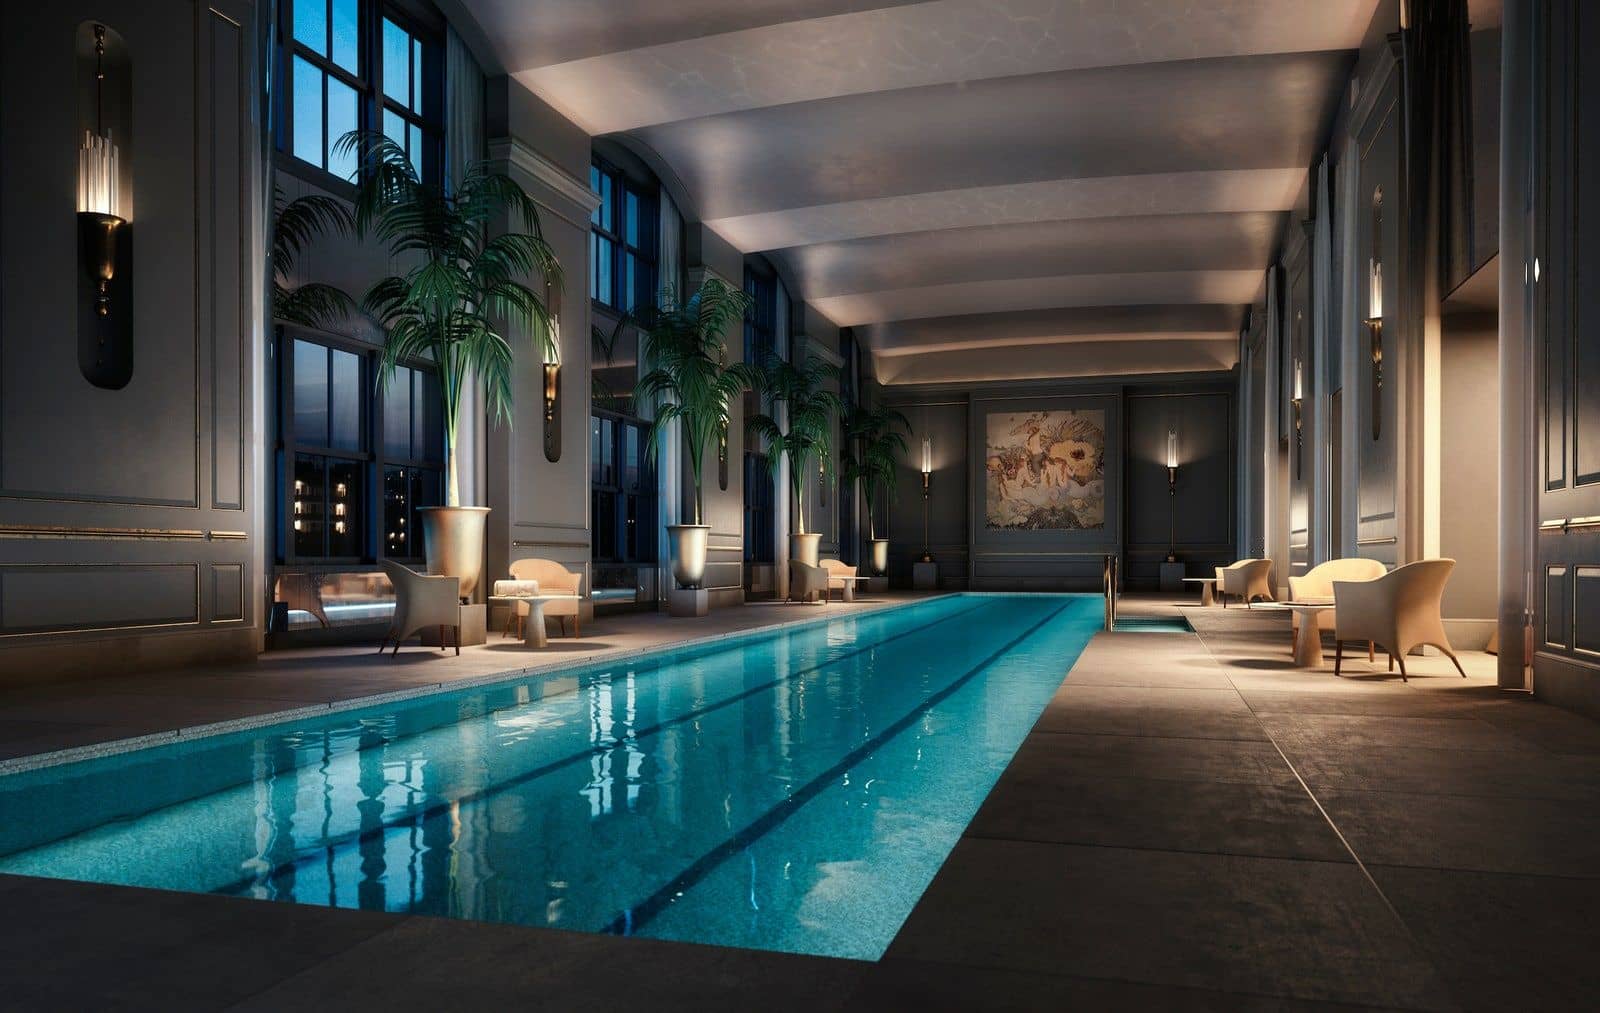 Lavish indoor swimming pool inside the newly complete Steinway Building, also known as the world's skinniest skyscraper.